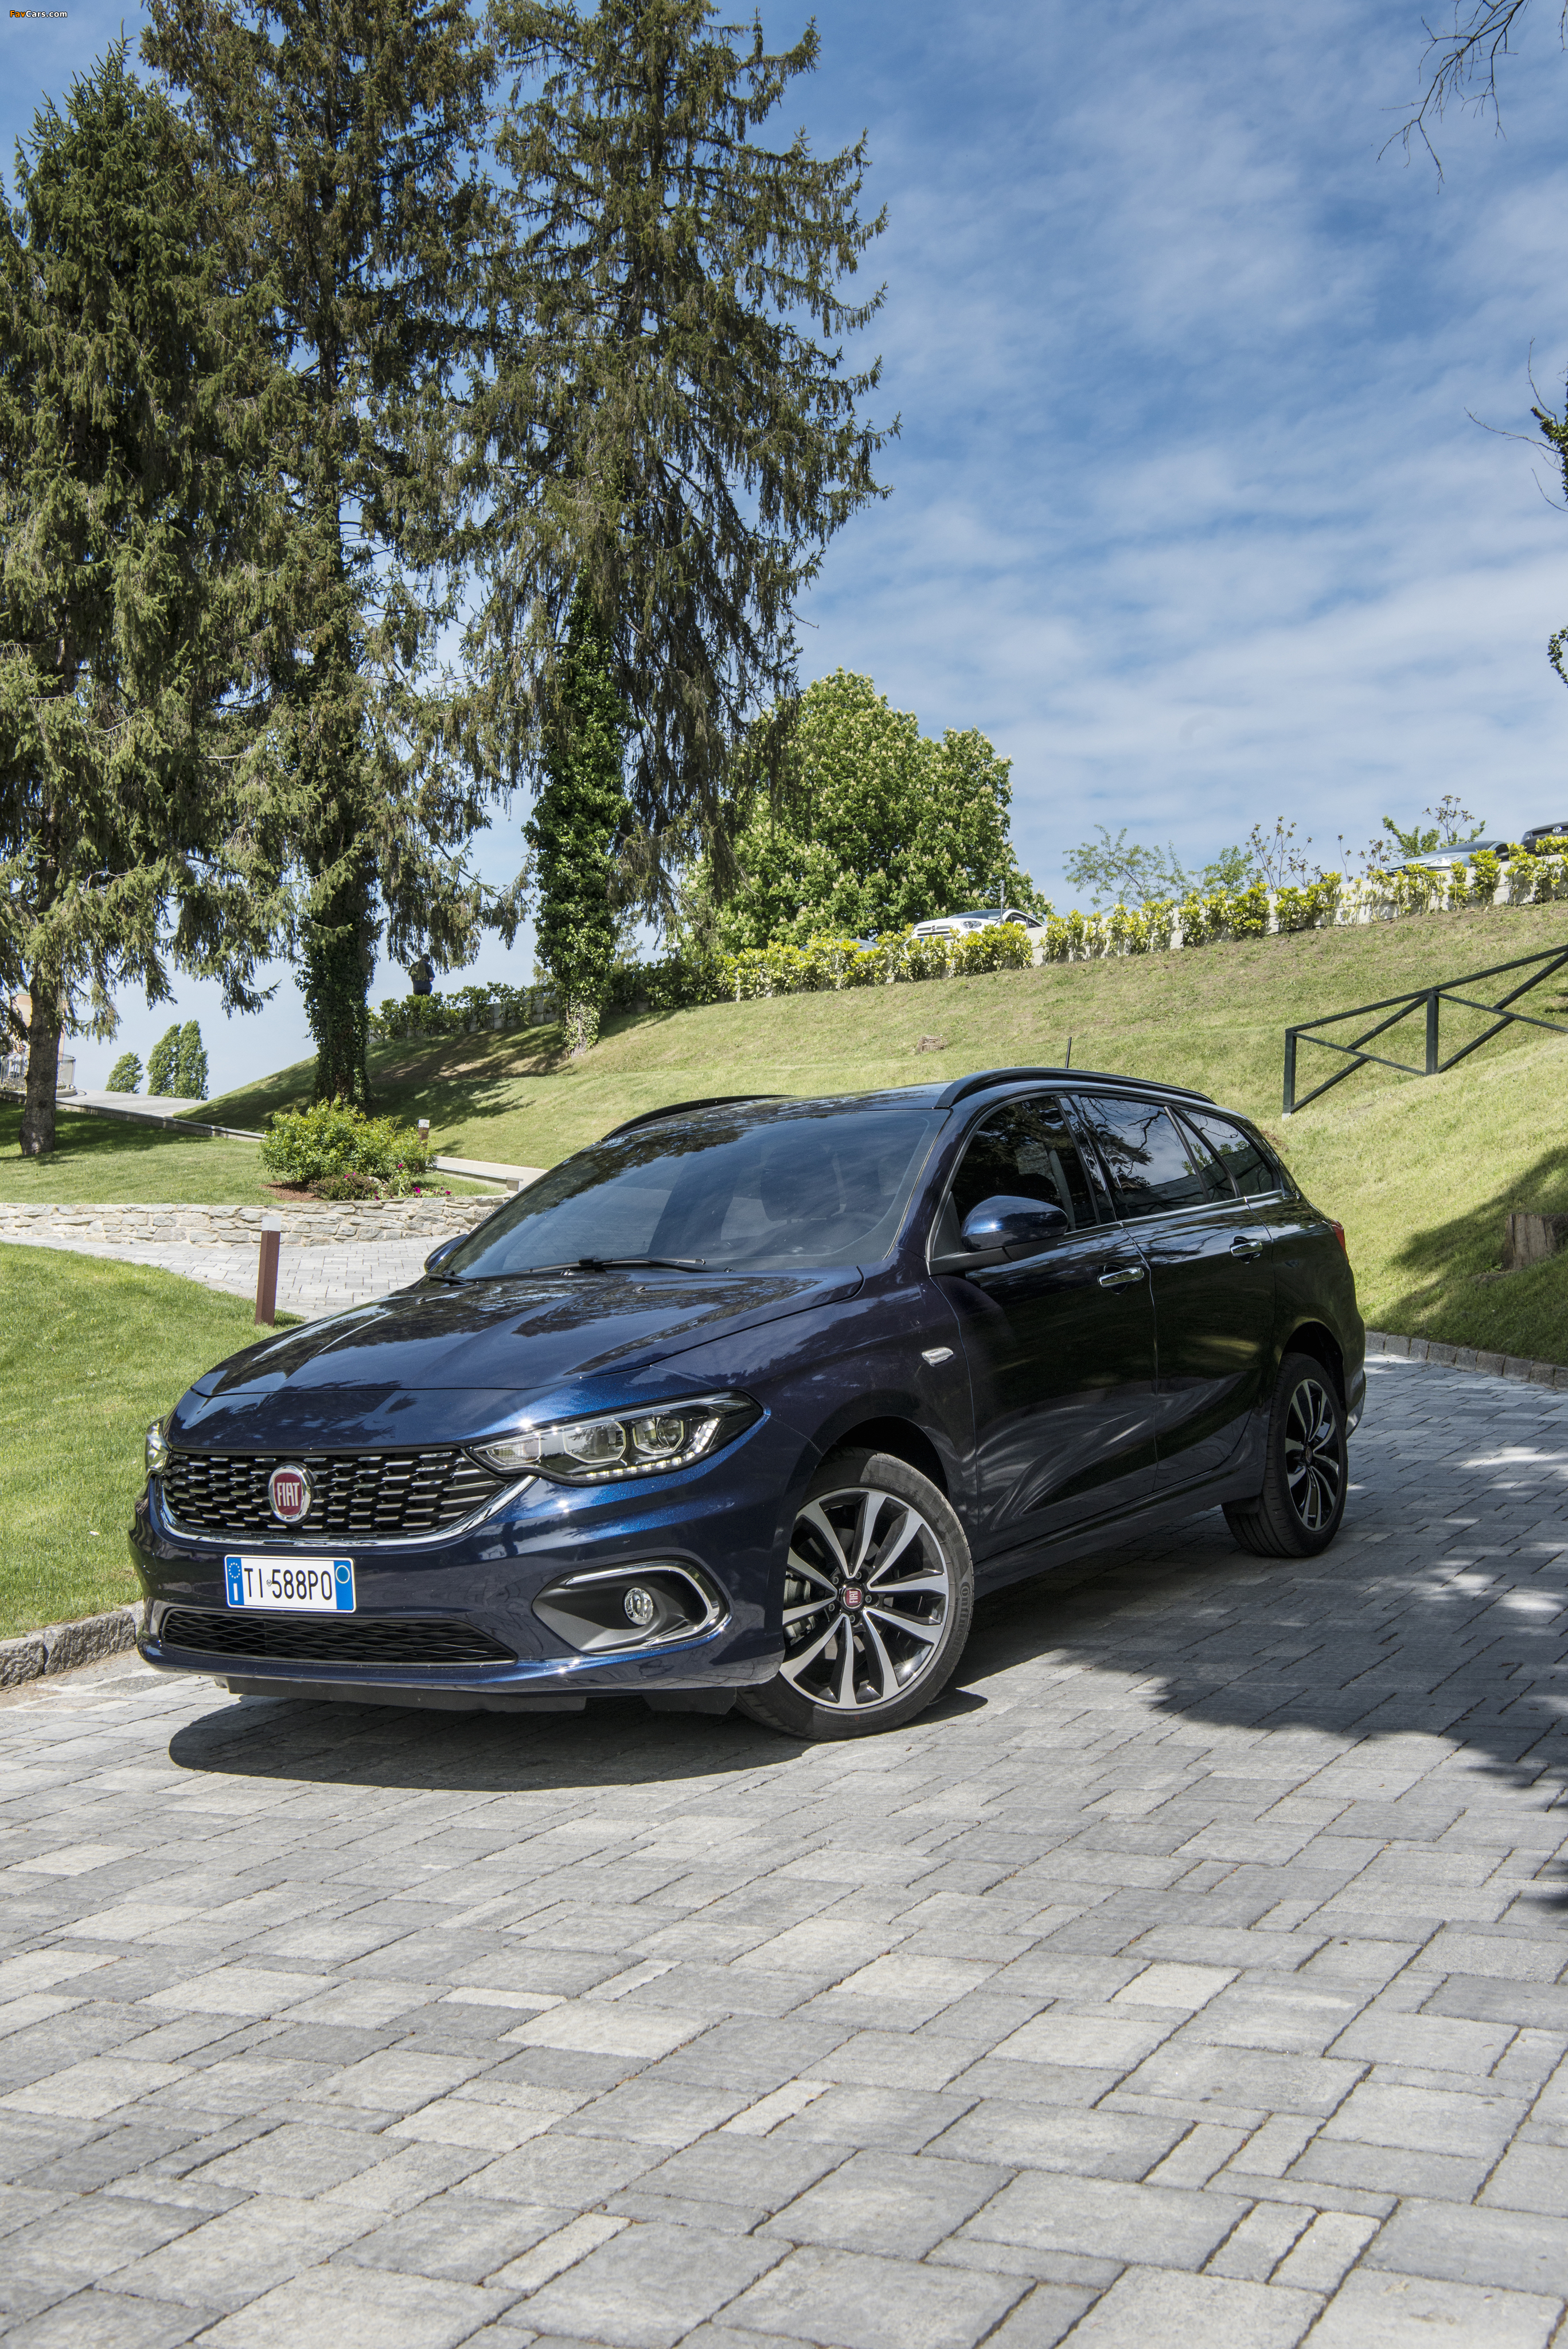 Fiat Tipo Station Wagon (357) 2016 wallpapers (2734 x 4096)